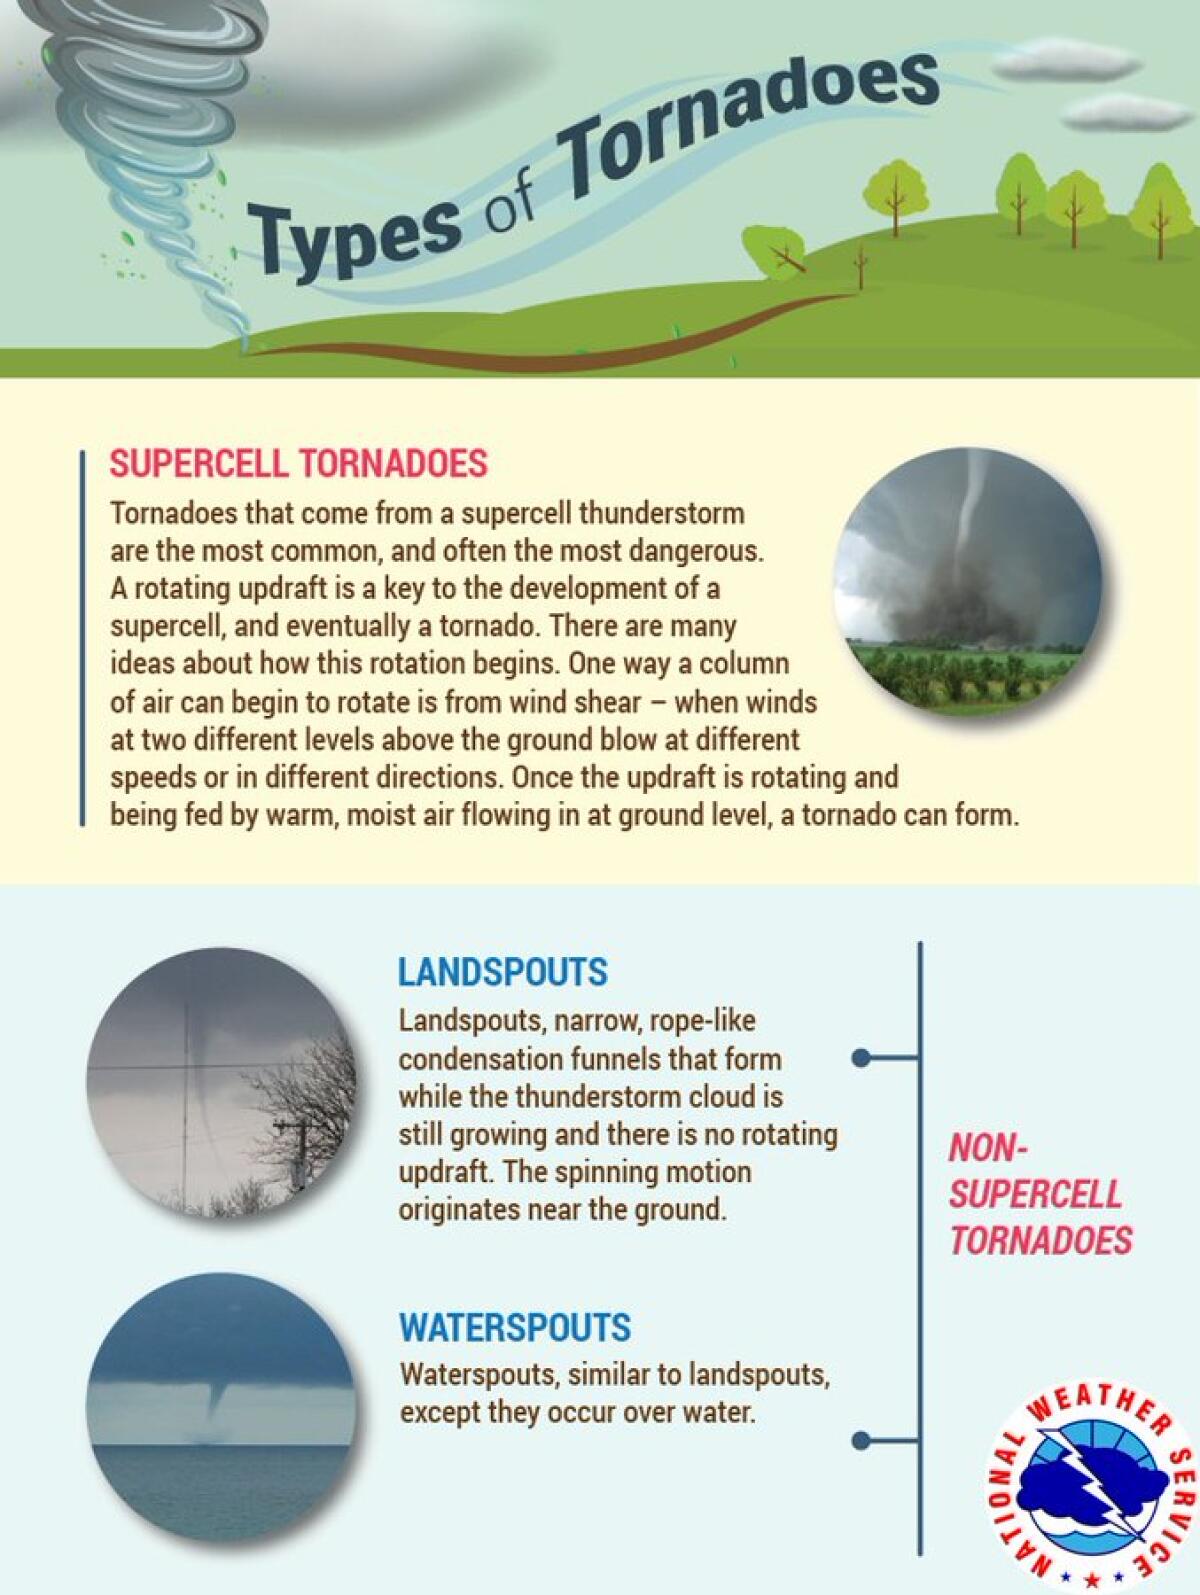 NWS graphic comparing types of tornadoes: Supercell tornadoes, landspouts and waterspouts